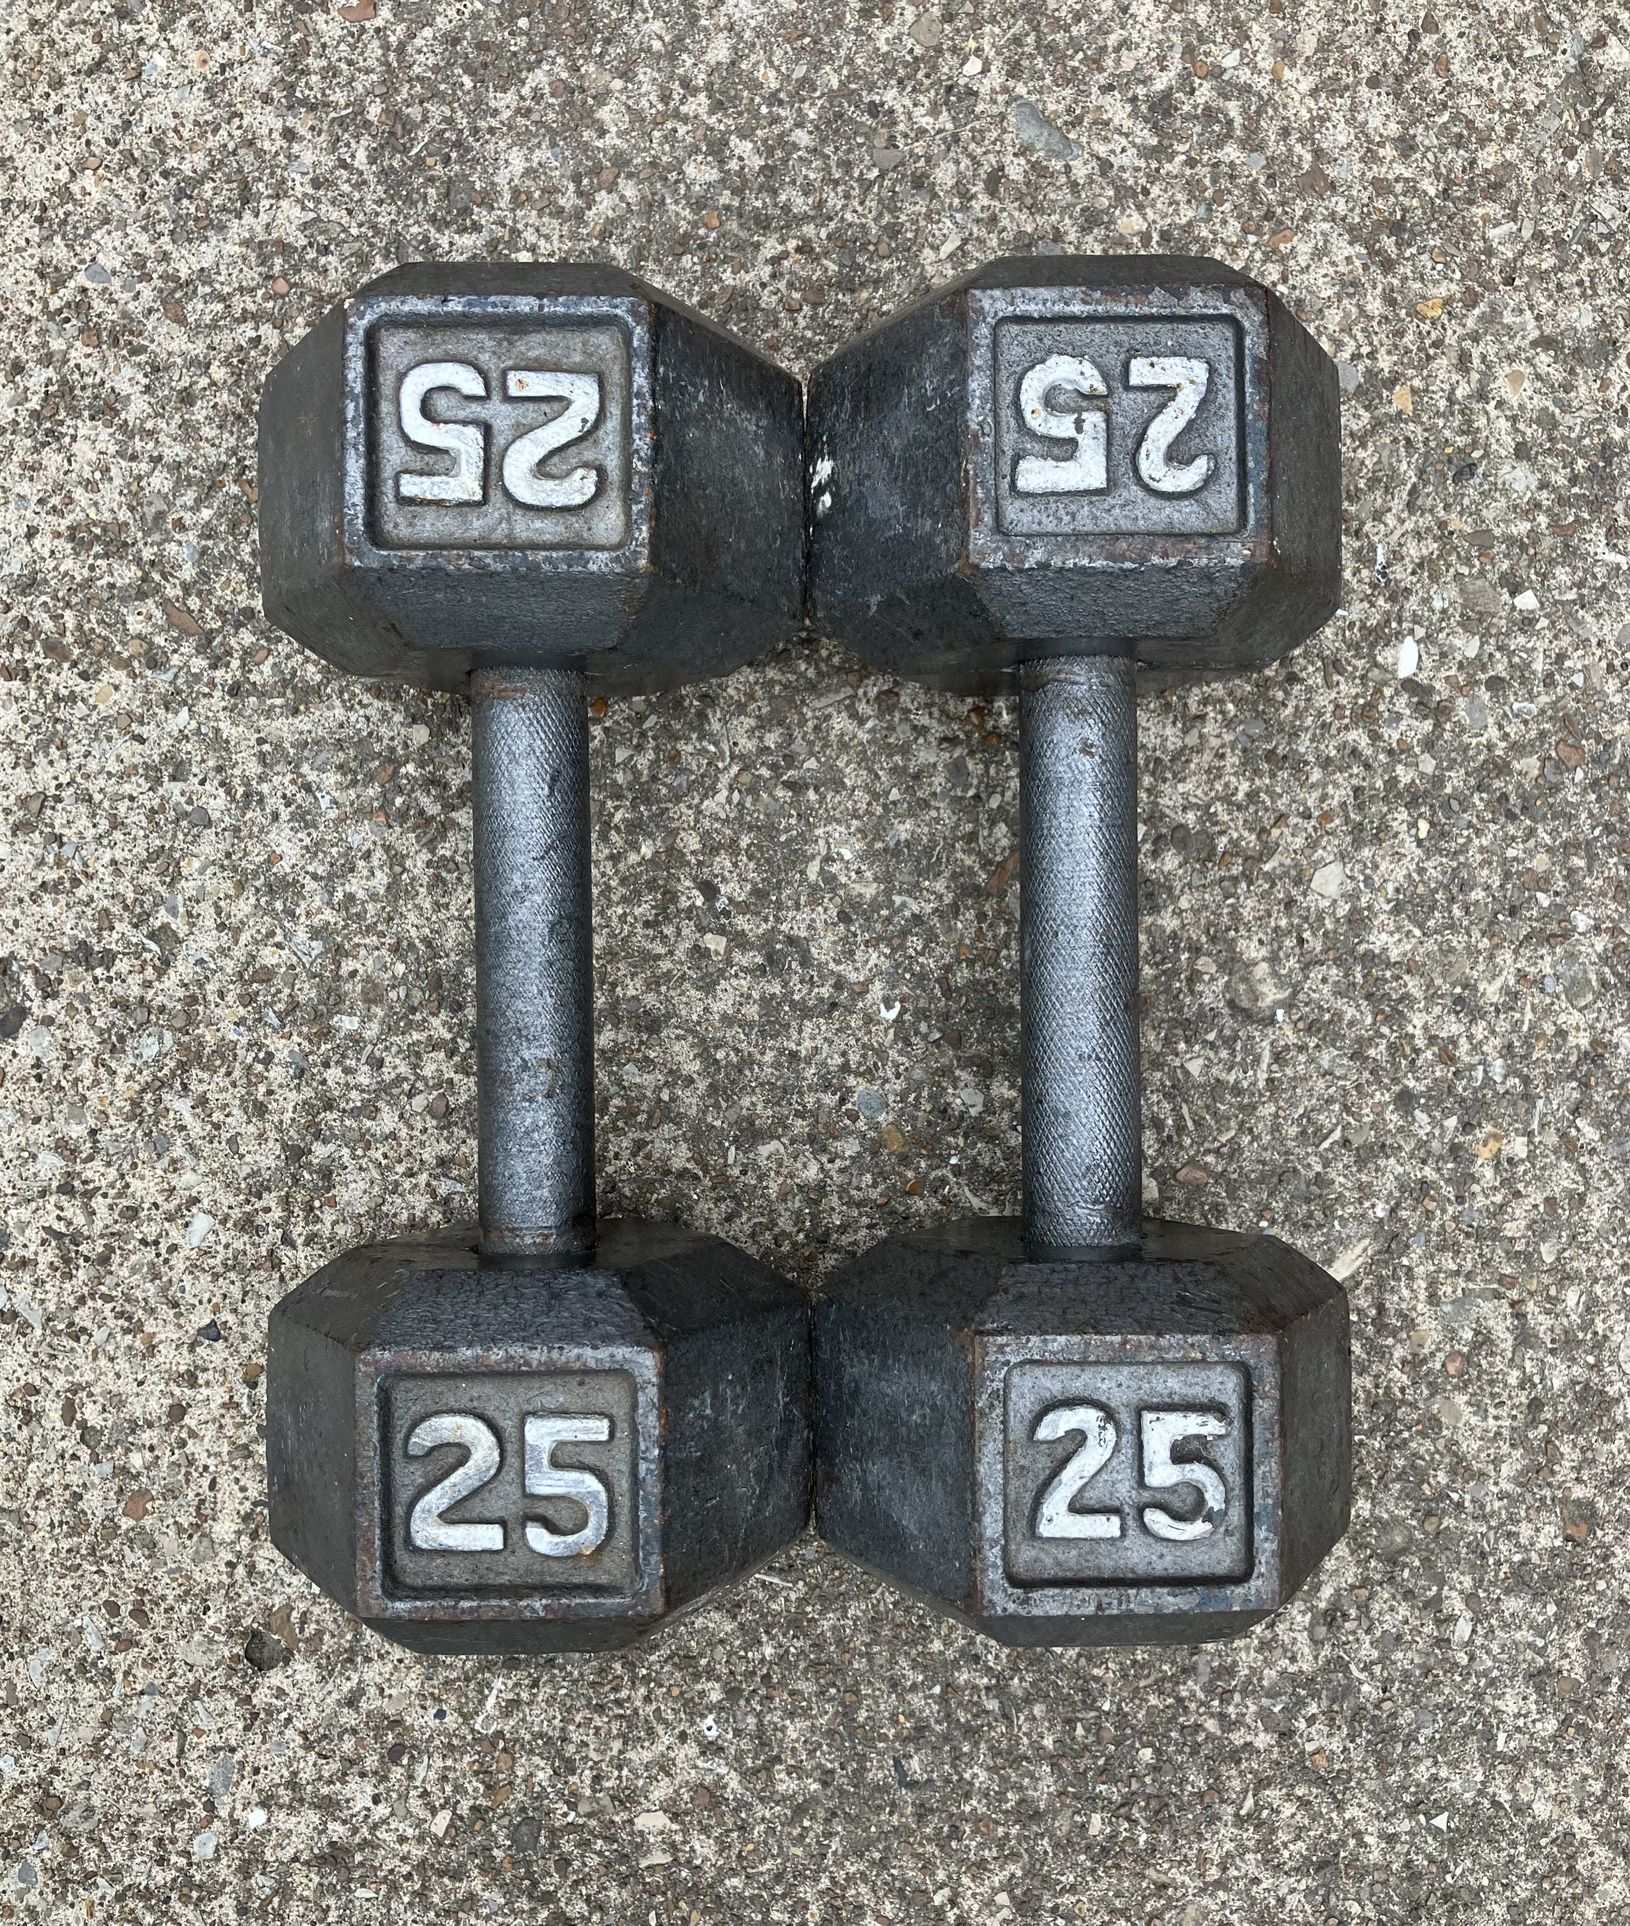 25 lb dumbbells dumbbell set Cast Iron Hex 50 lbs total weights weight 25lb 25lbs pair pounds pound # 